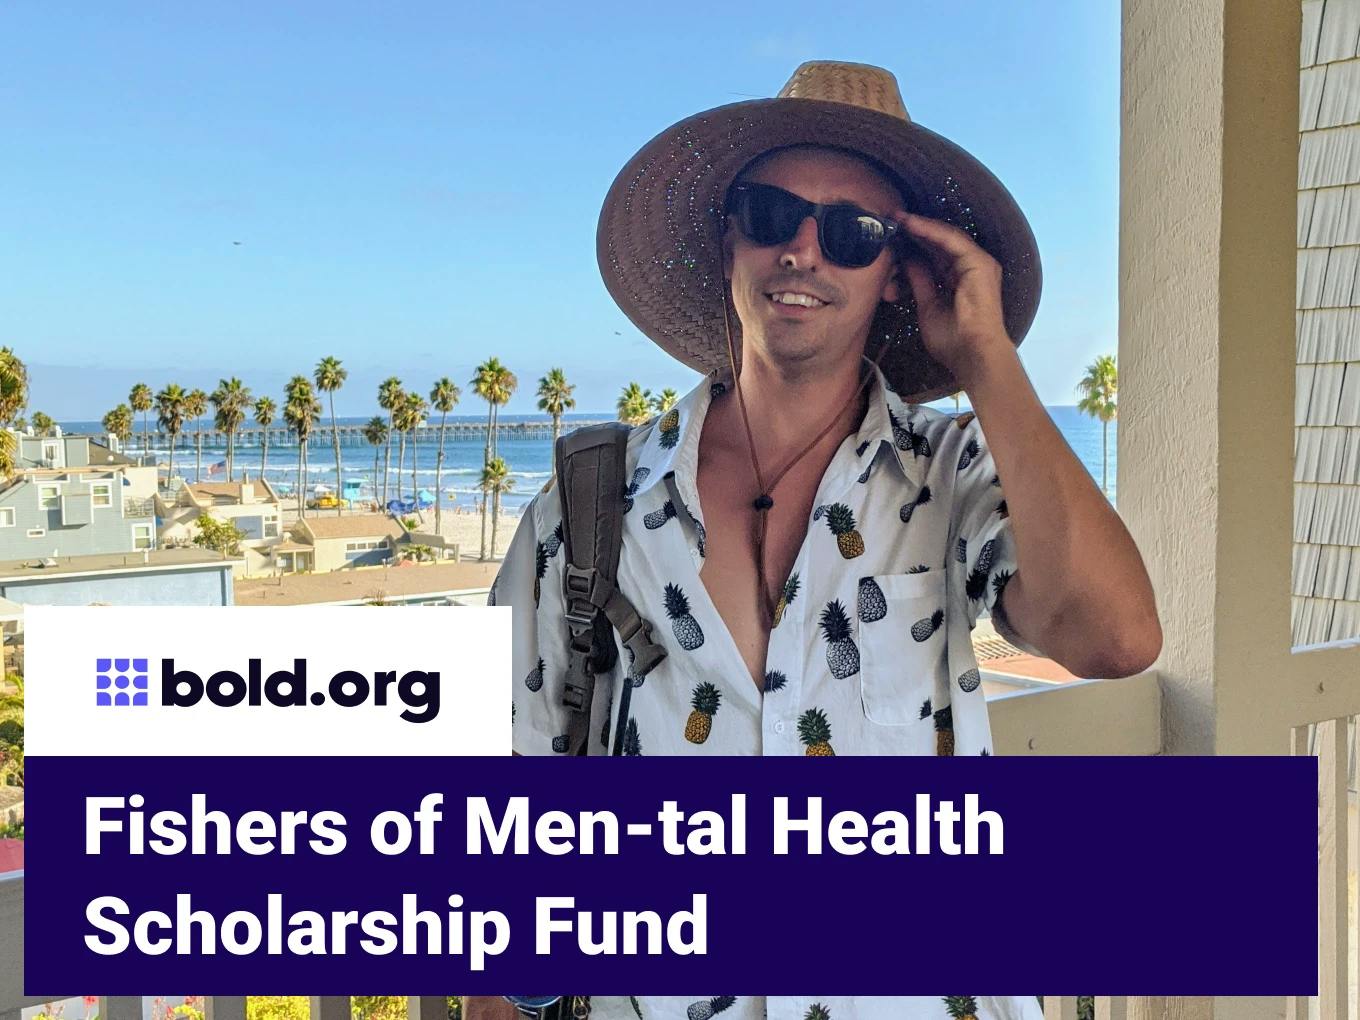 Fishers of Men-tal Health Scholarship Fund